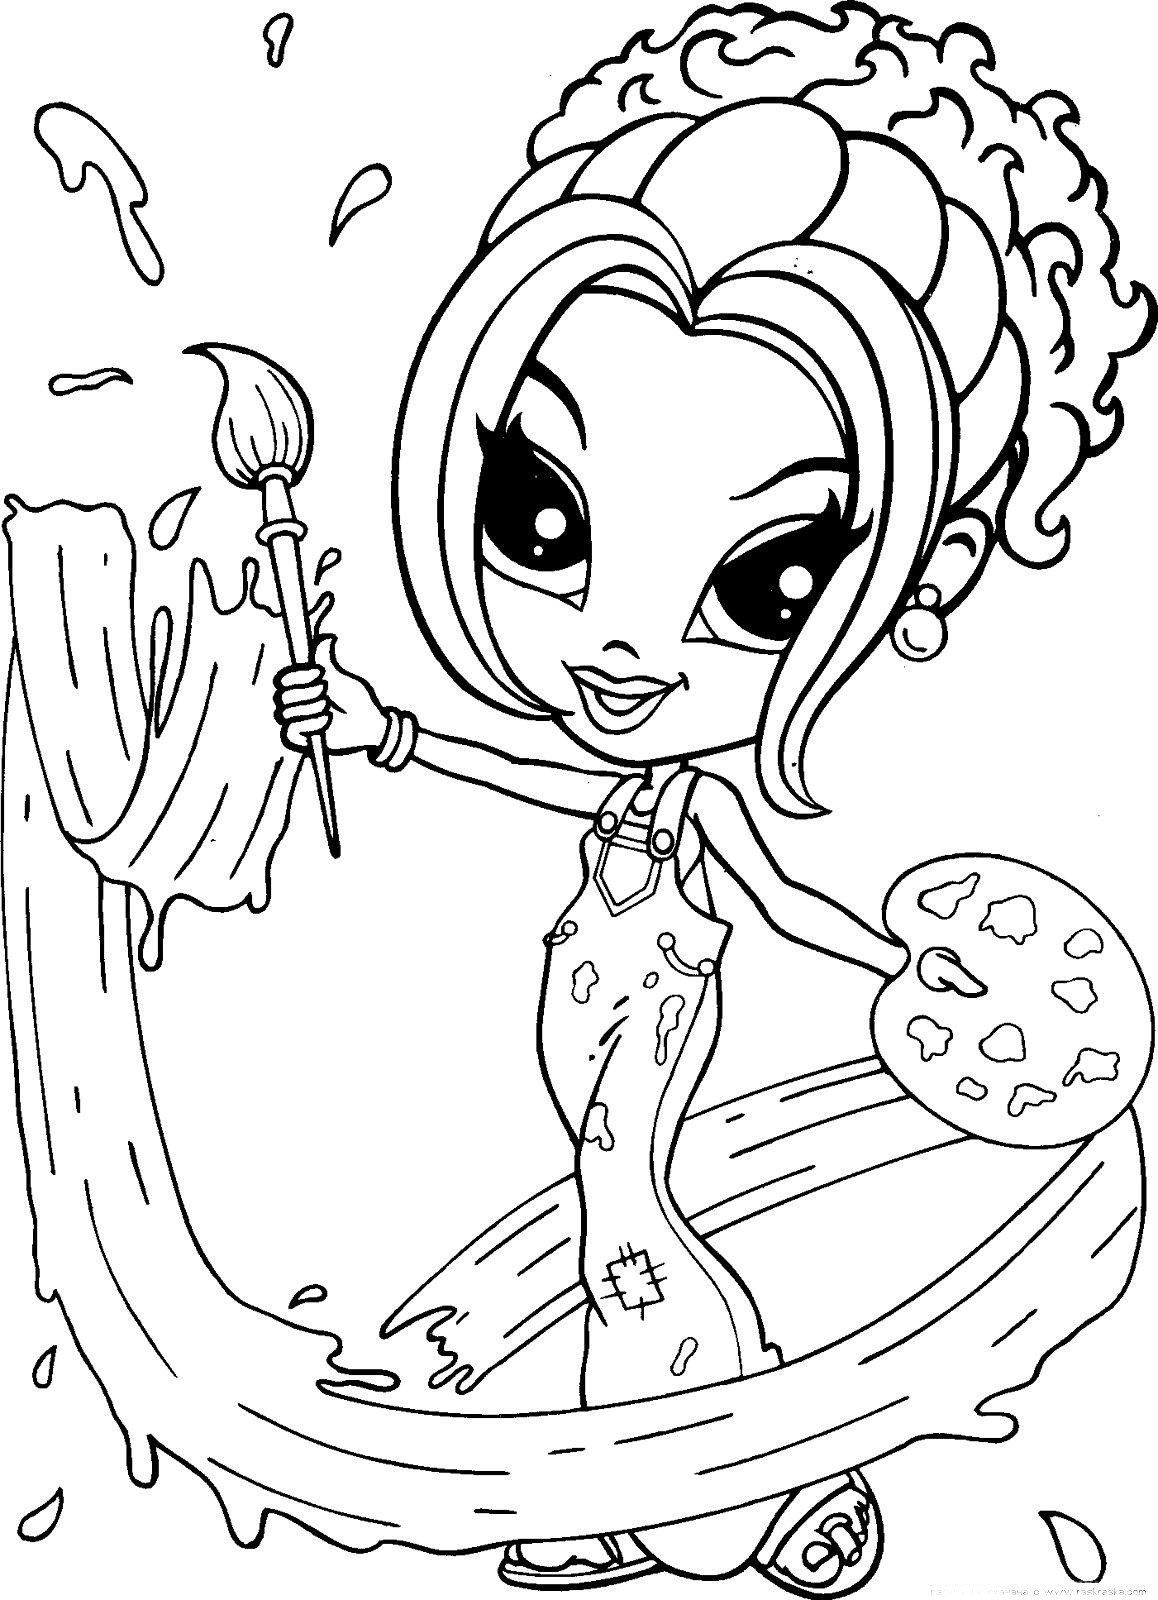 Lisa Frank Mermaid Coloring Pages
 Lisa Frank Coloring Pages Unicorns — CLASSIC Style Lisa